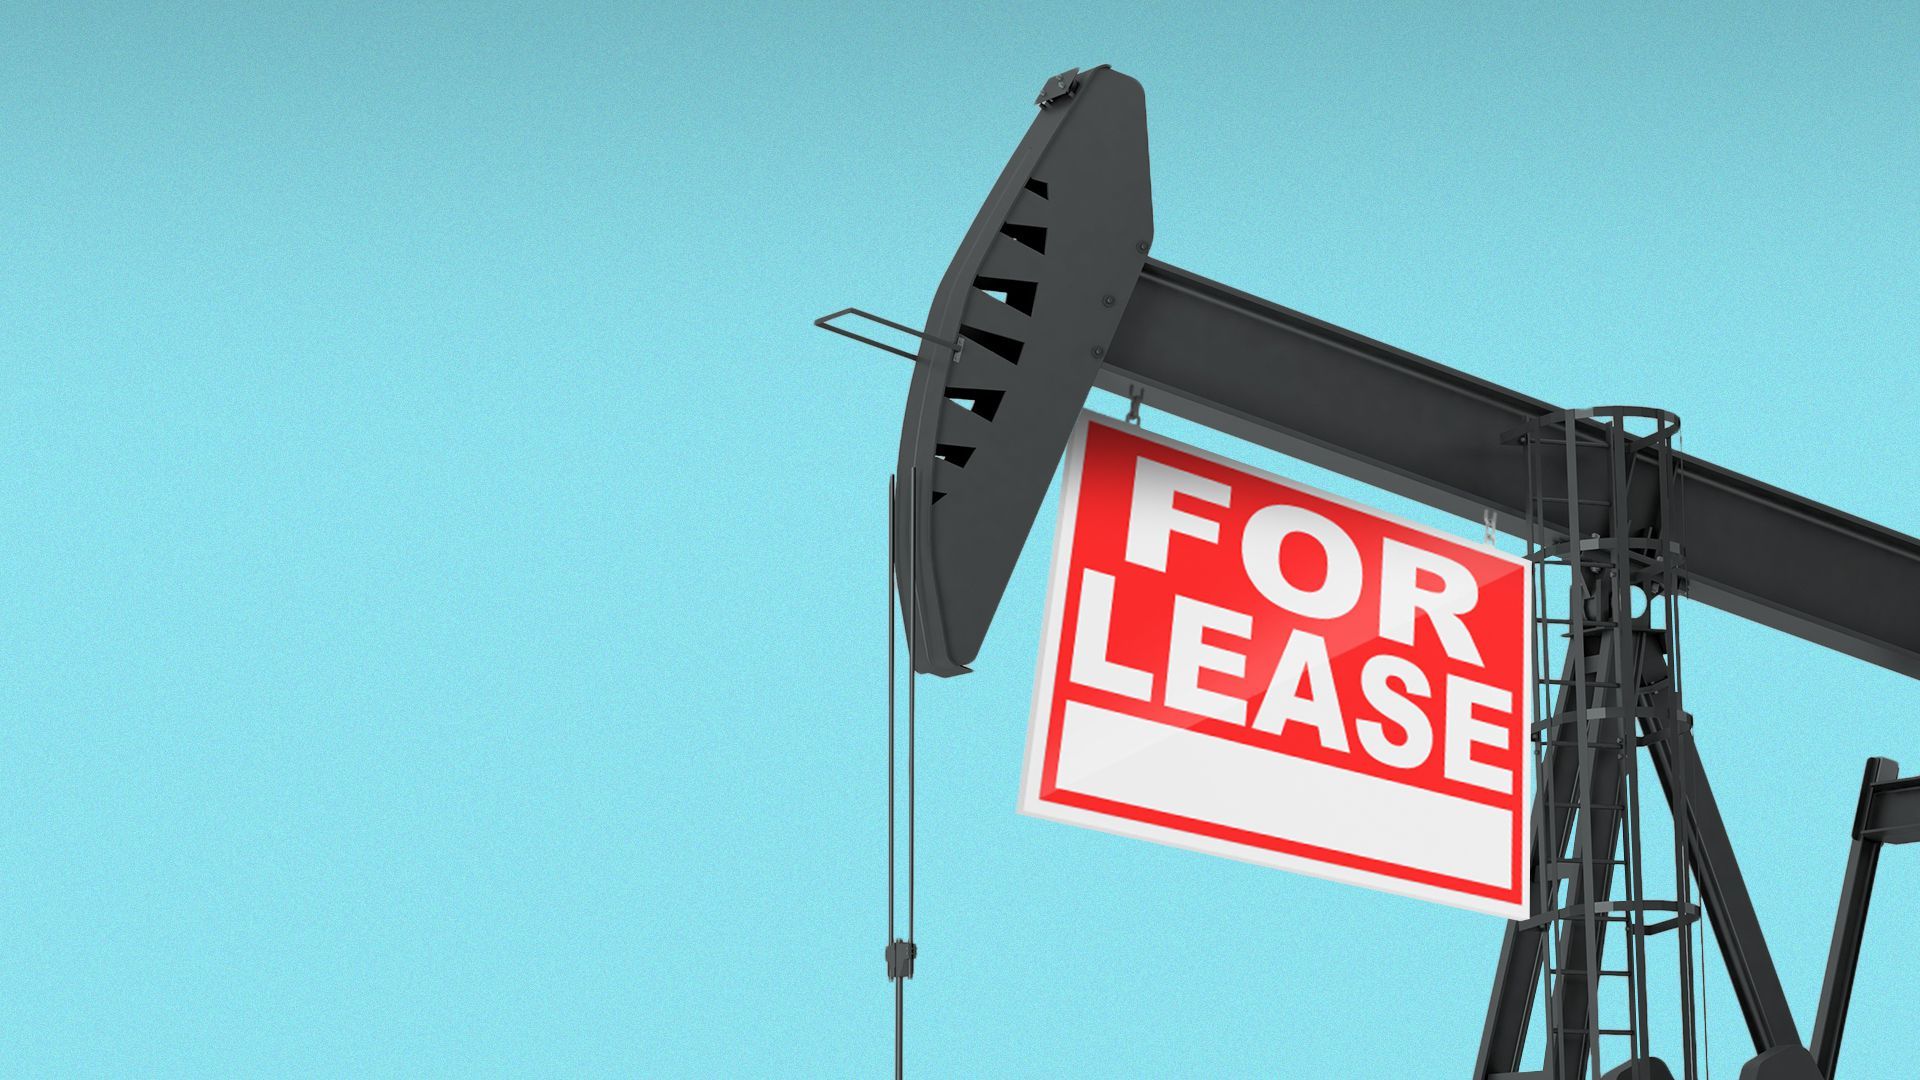 Illustration of an oil rig with a "For Lease" sign hanging from the top like a real estate sign